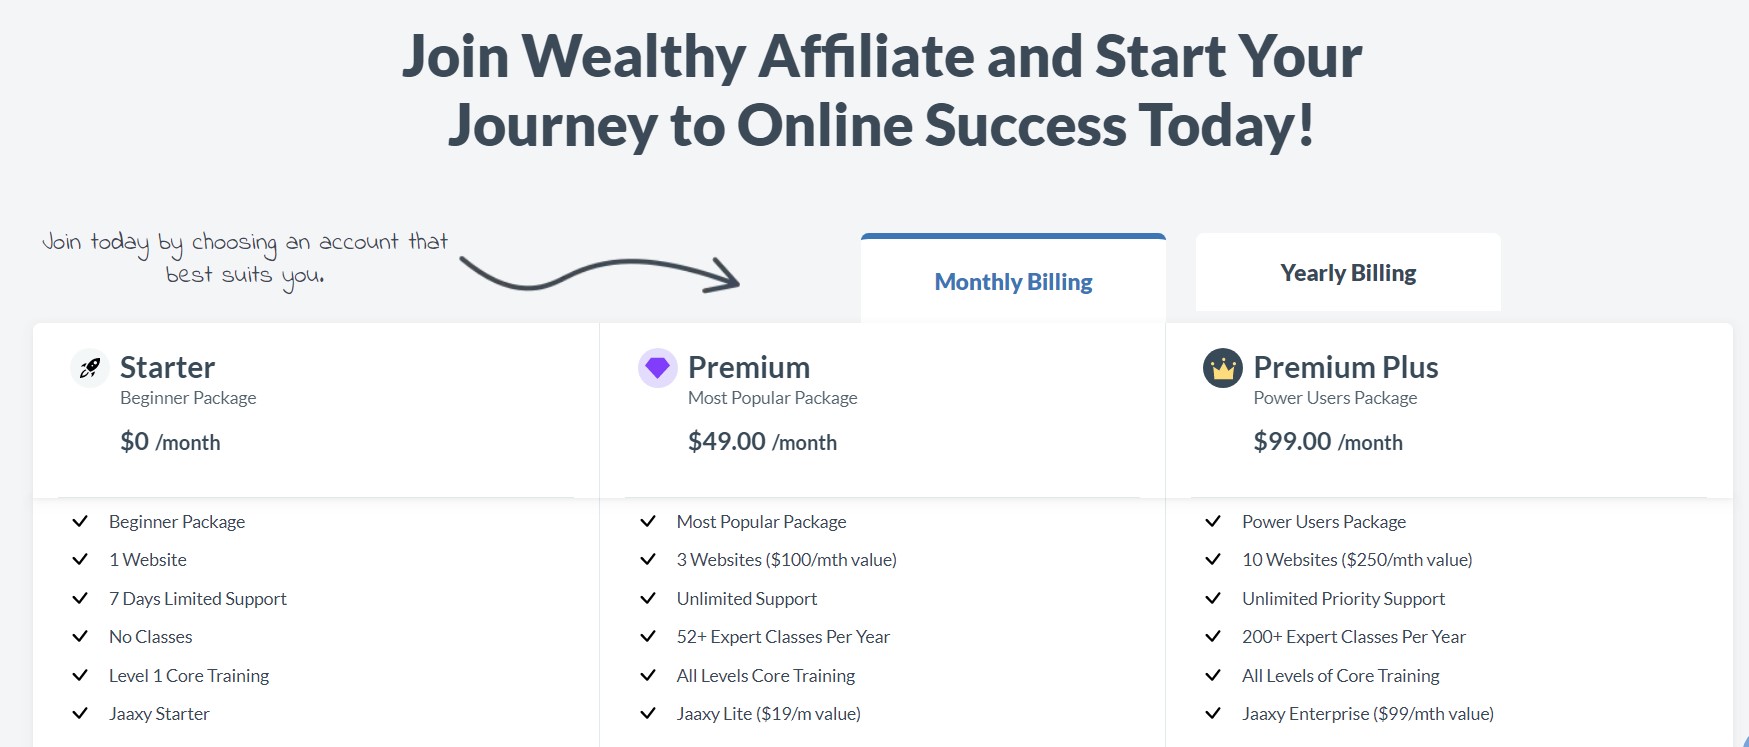 The Skinny on Wealthy Affiliate